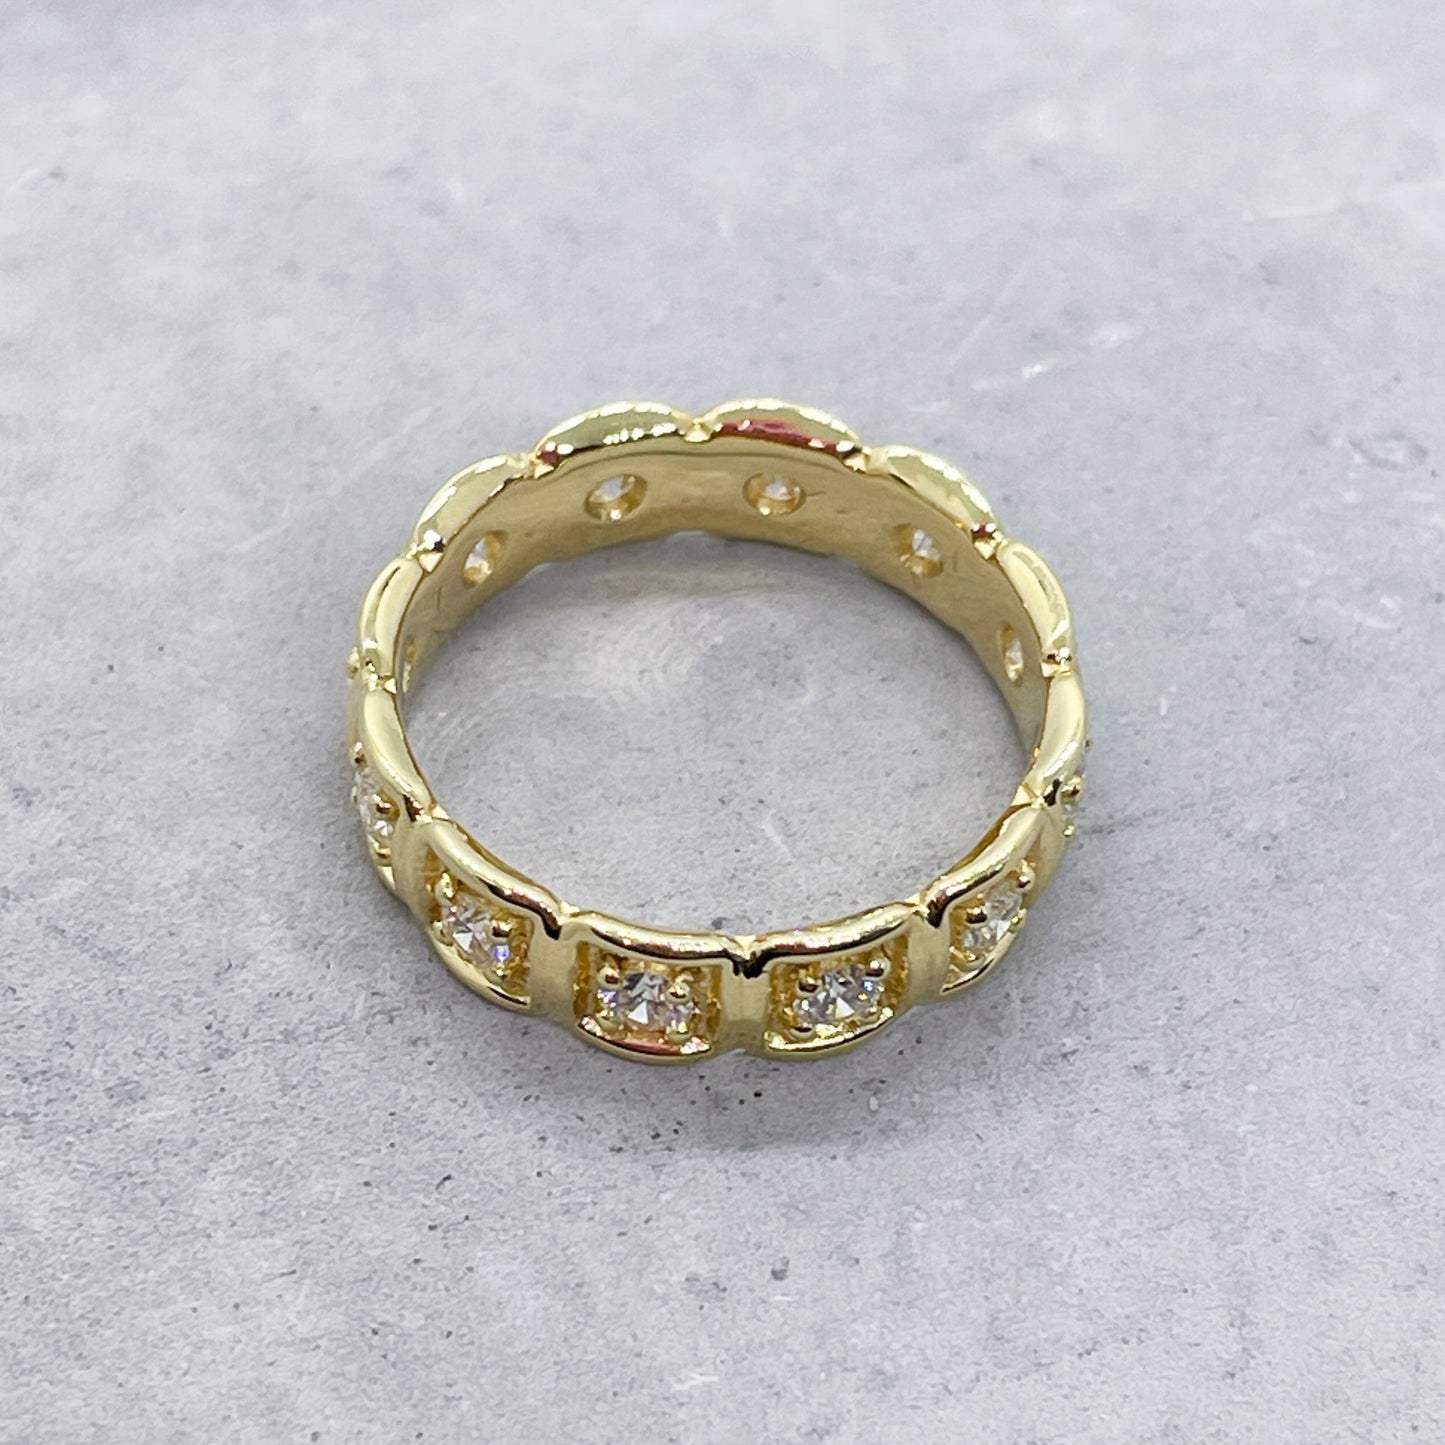 Top View 18k Yellow Gold Eternity Band Square Setting